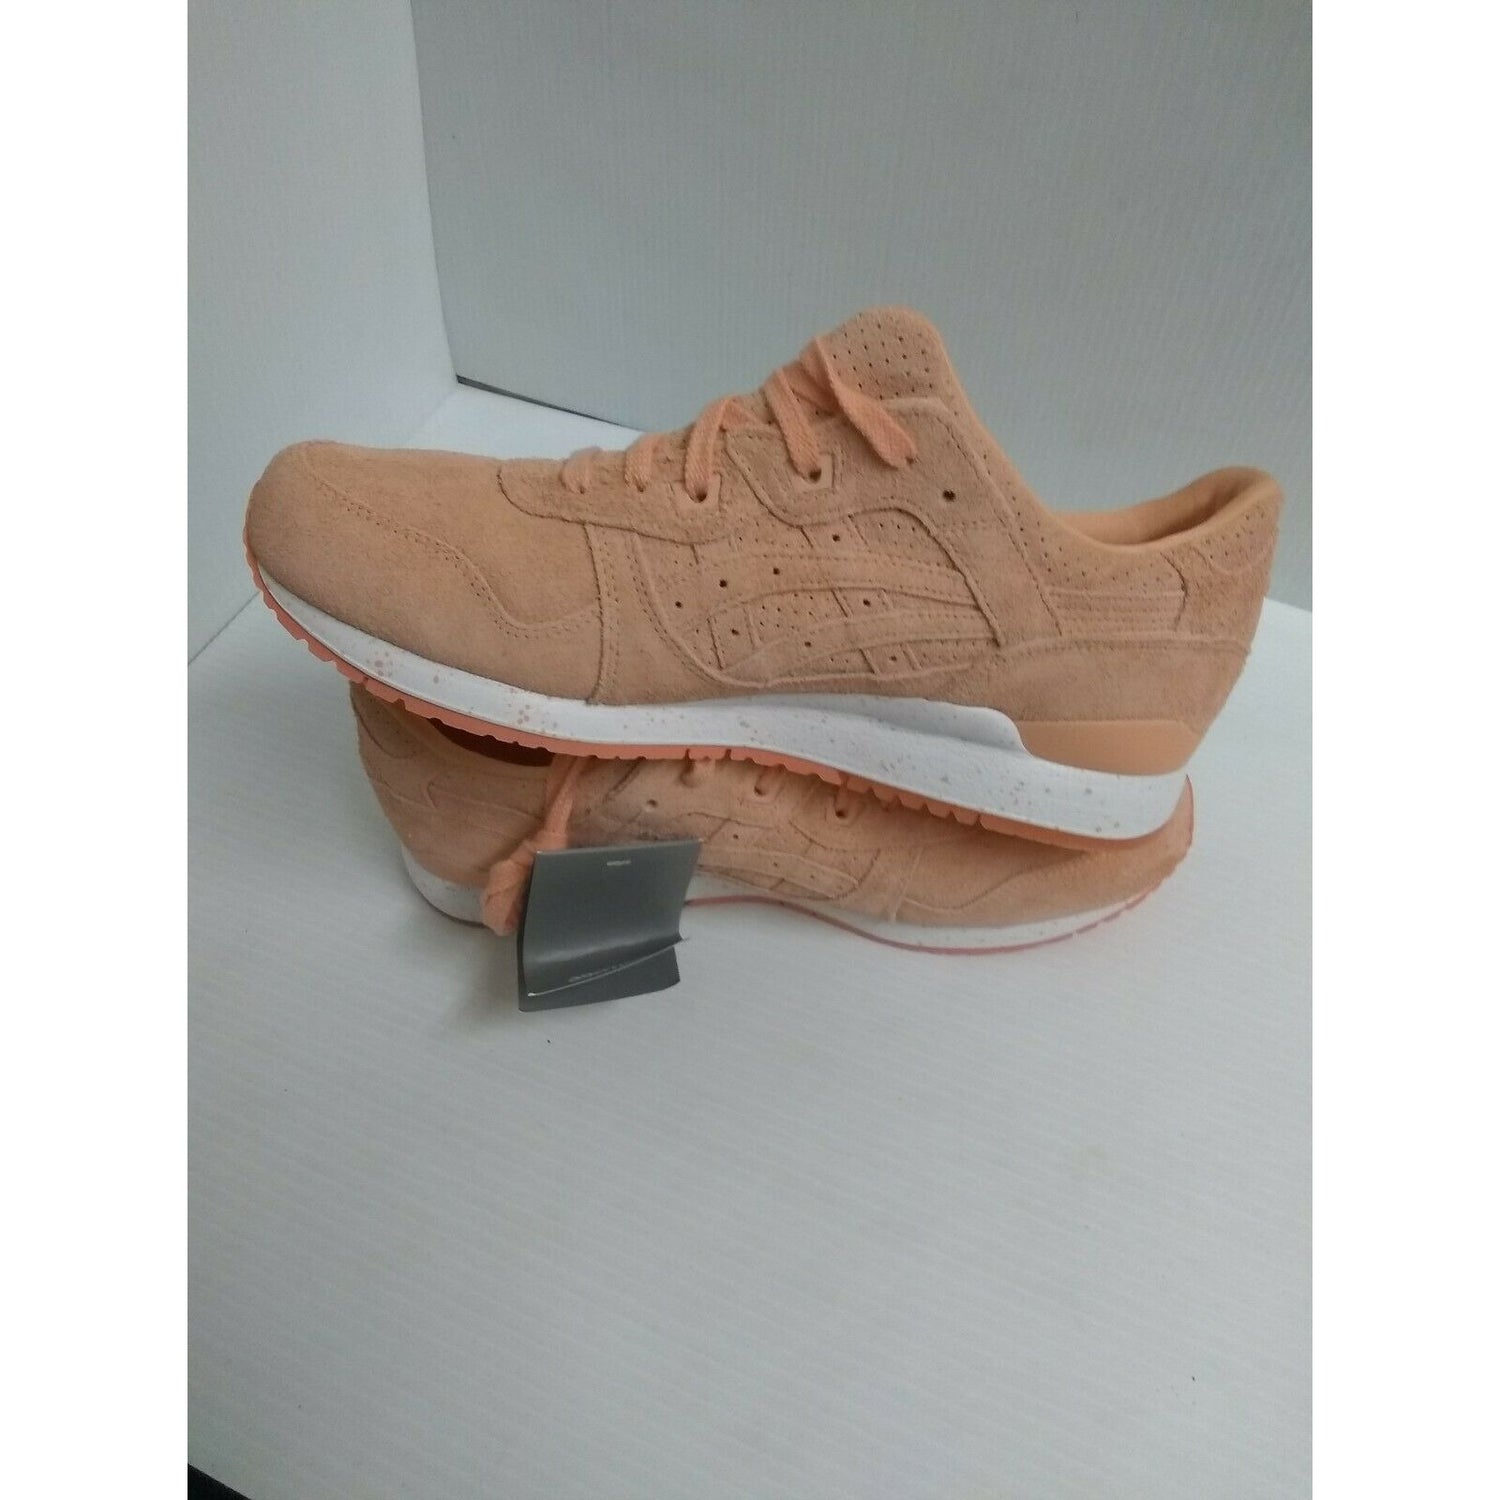 Asics Men's Gel Lyte iii Apricot Ice running shoes Size 9 US